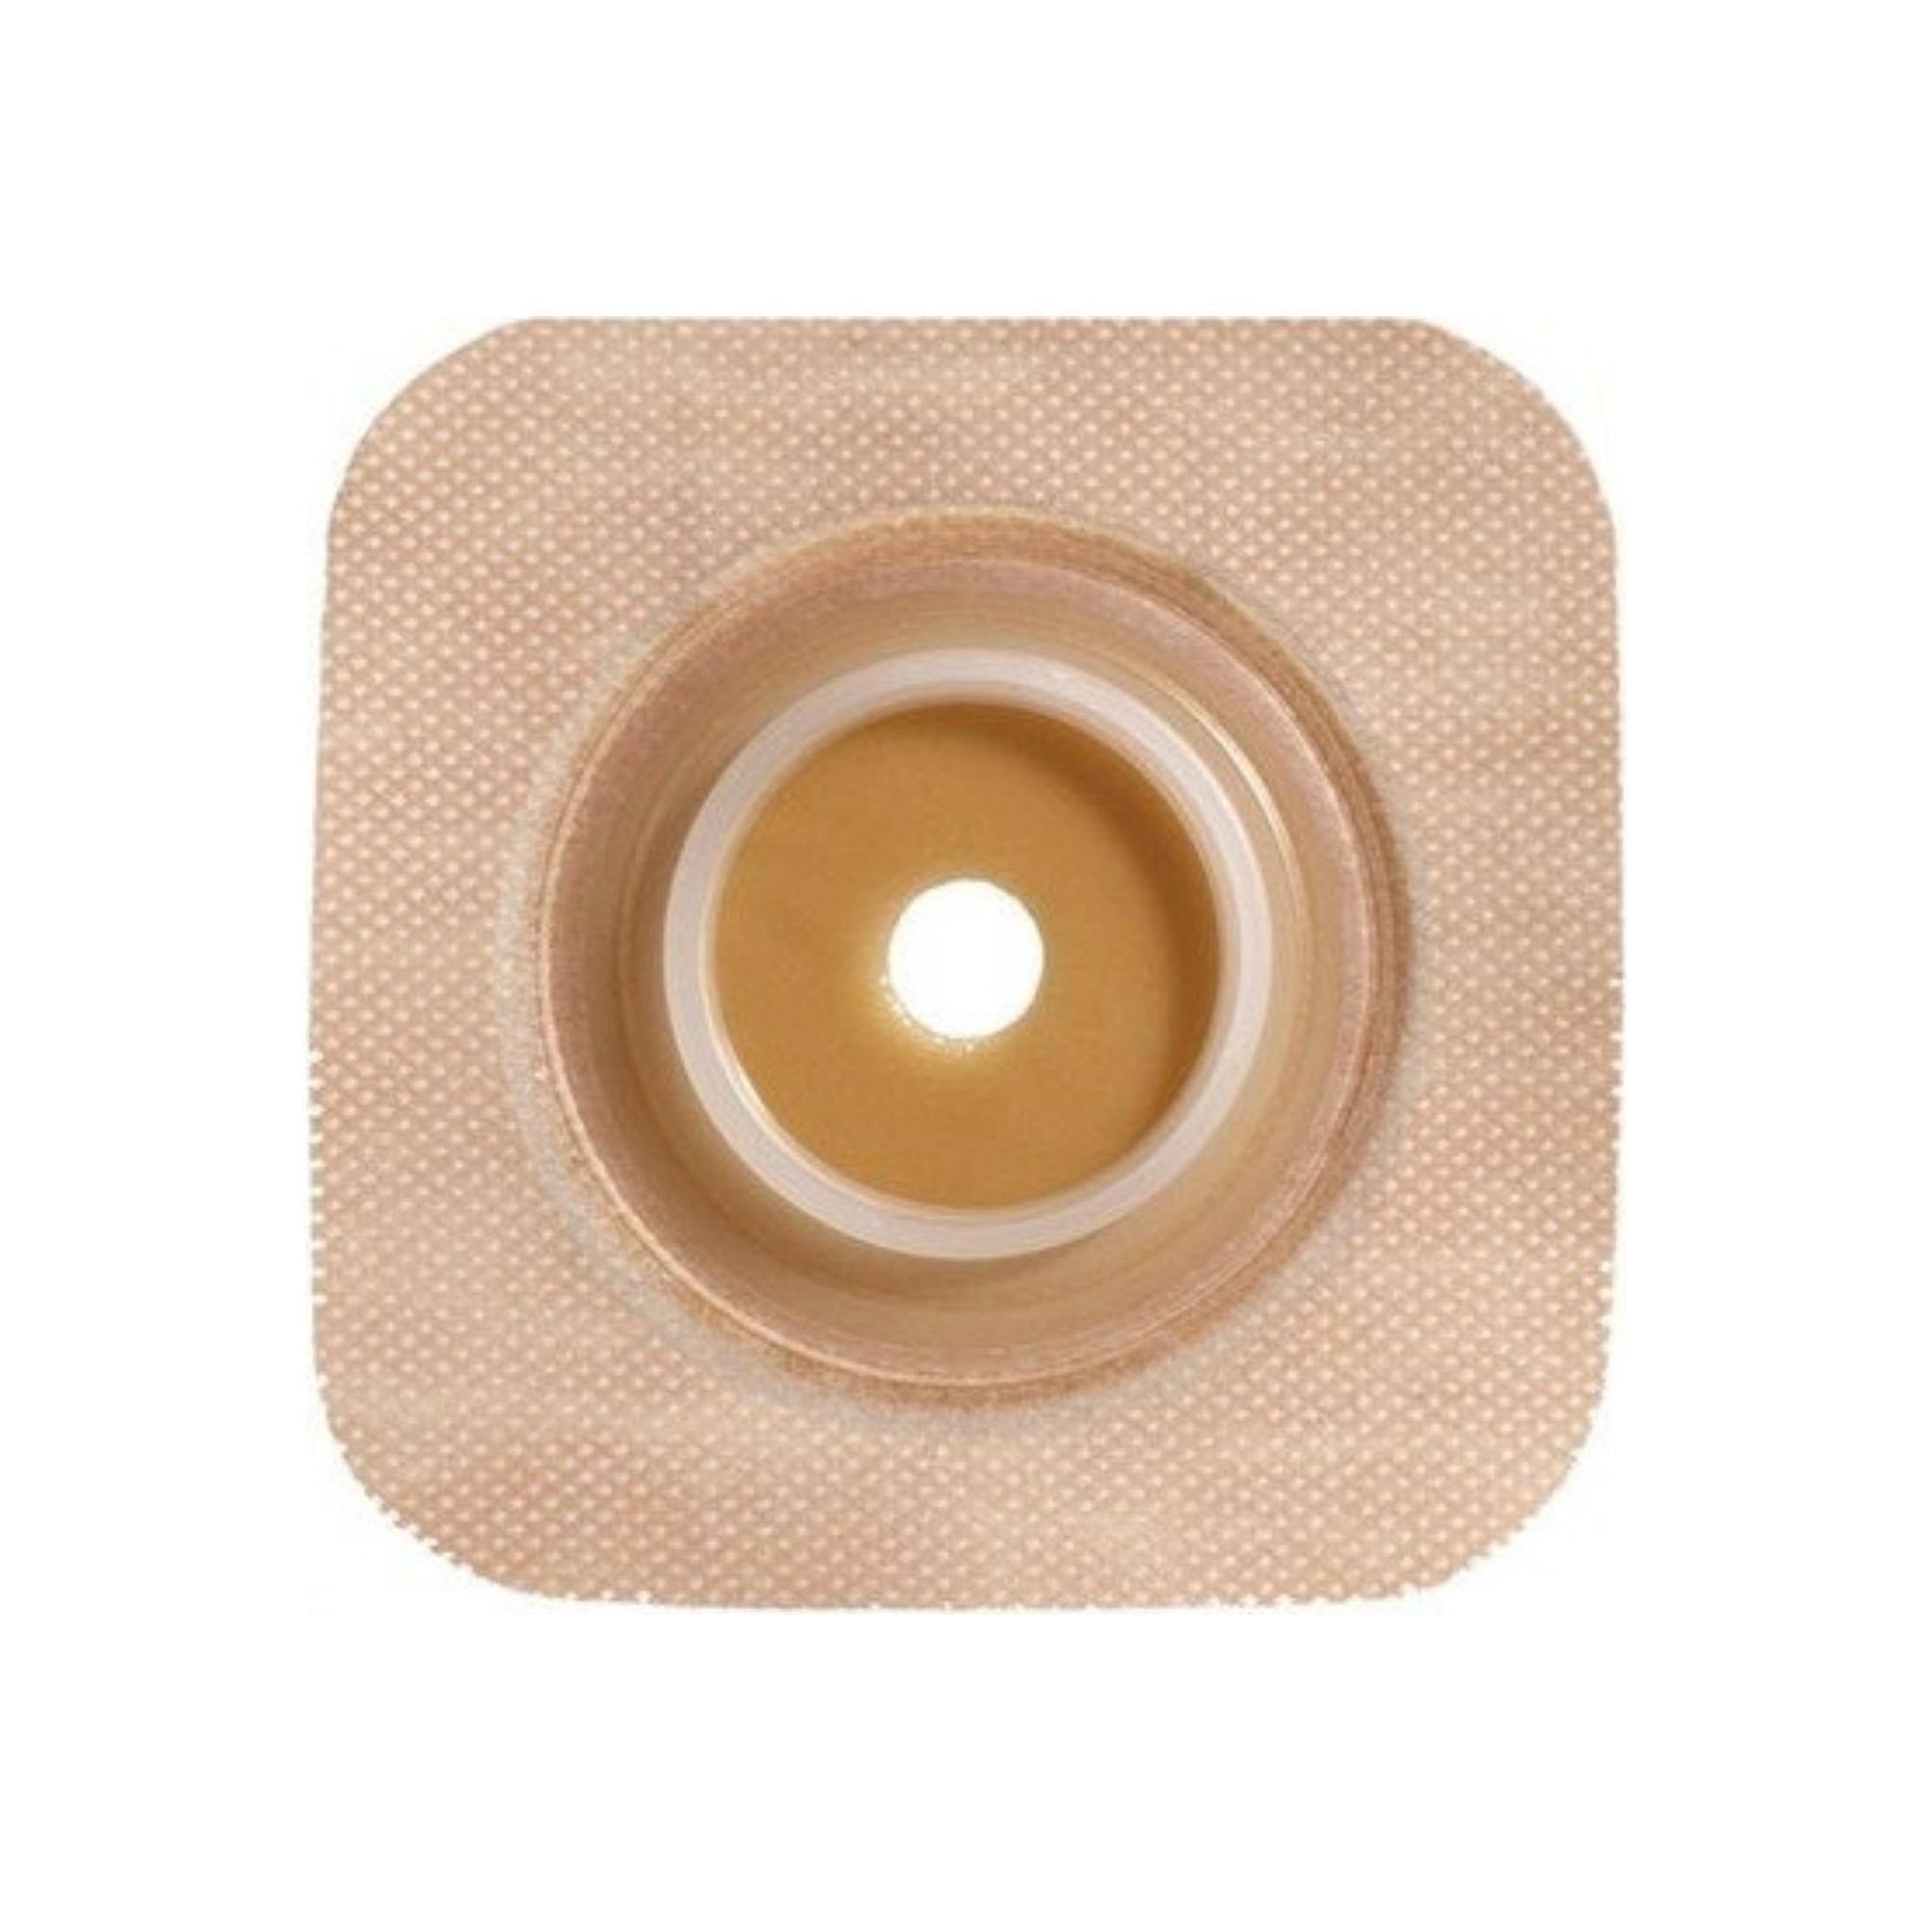 Convatec Surfit Natura Stomahesive Flexible Cut-to-fit Skin Barrier with Tape Collar - Tan, 1.75"